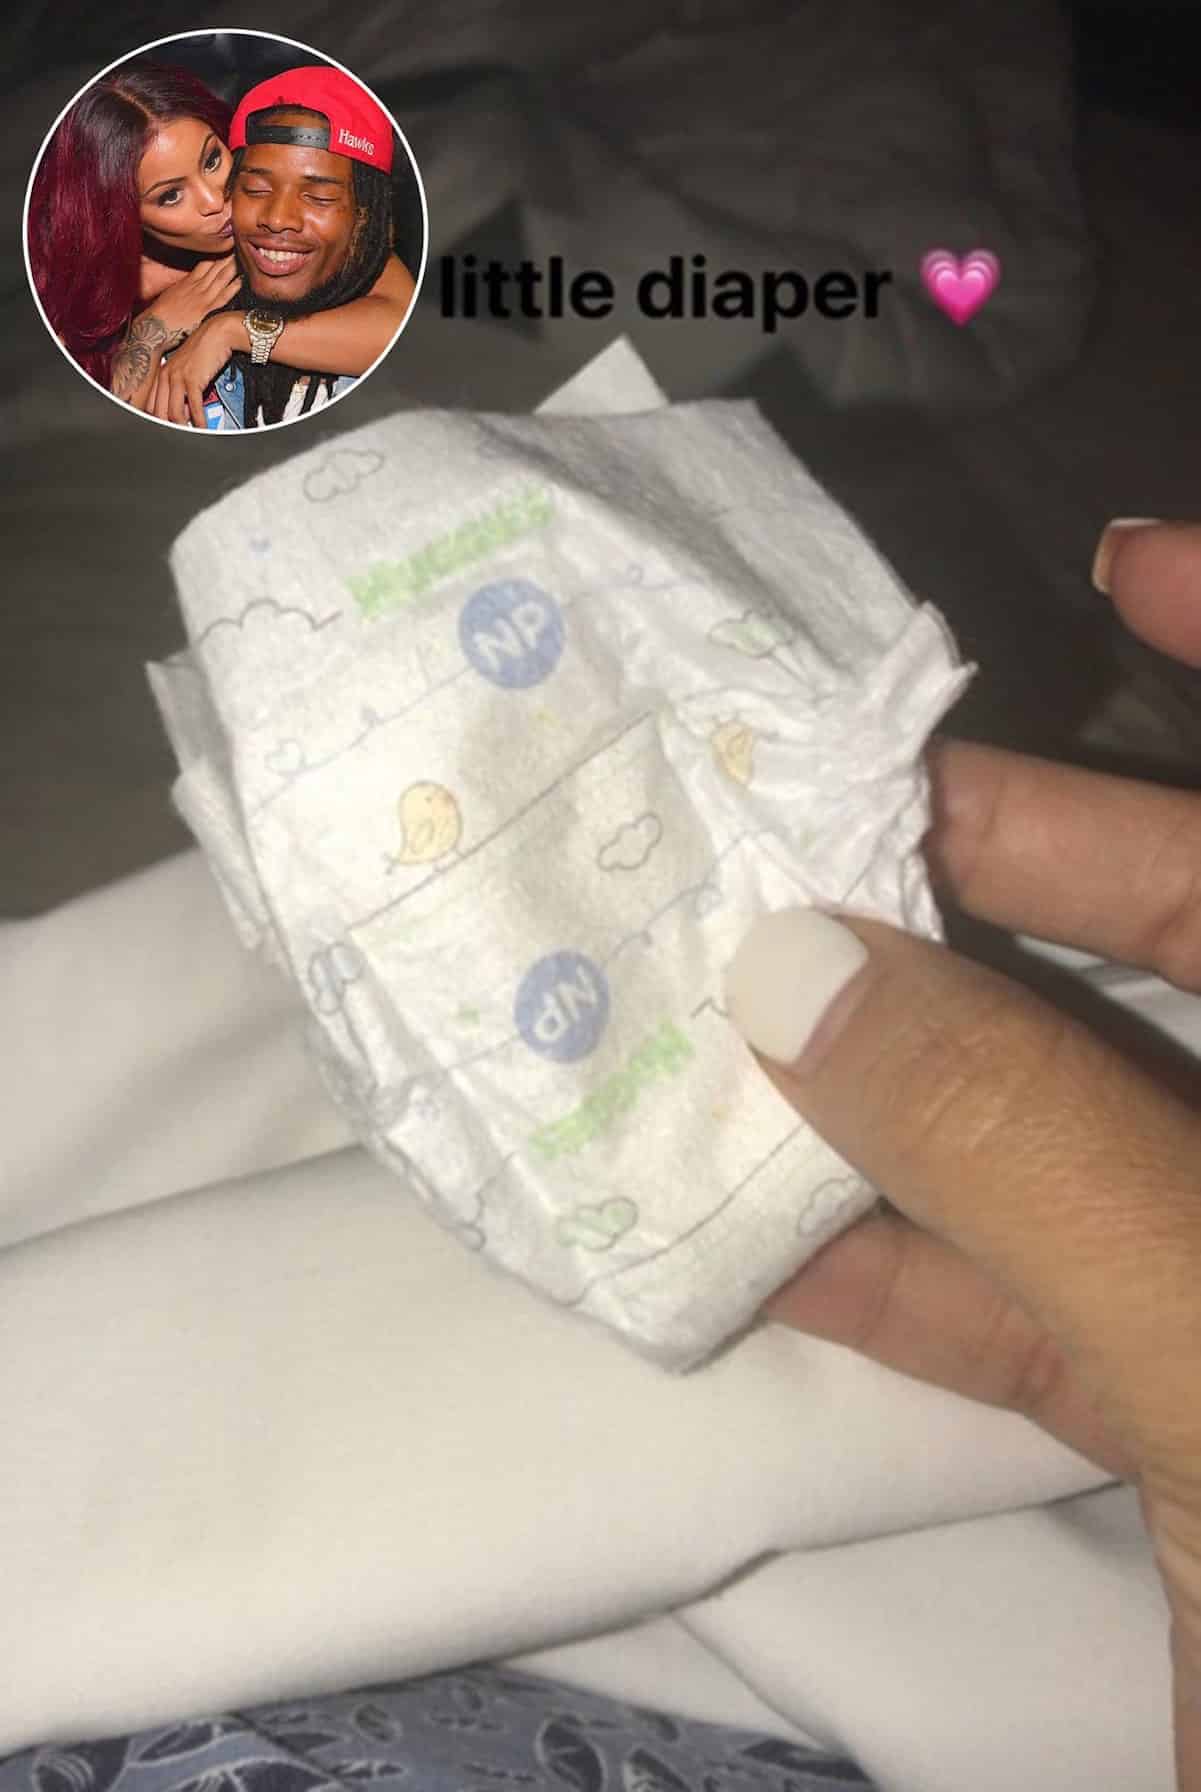 alexis skyy gives birth premature